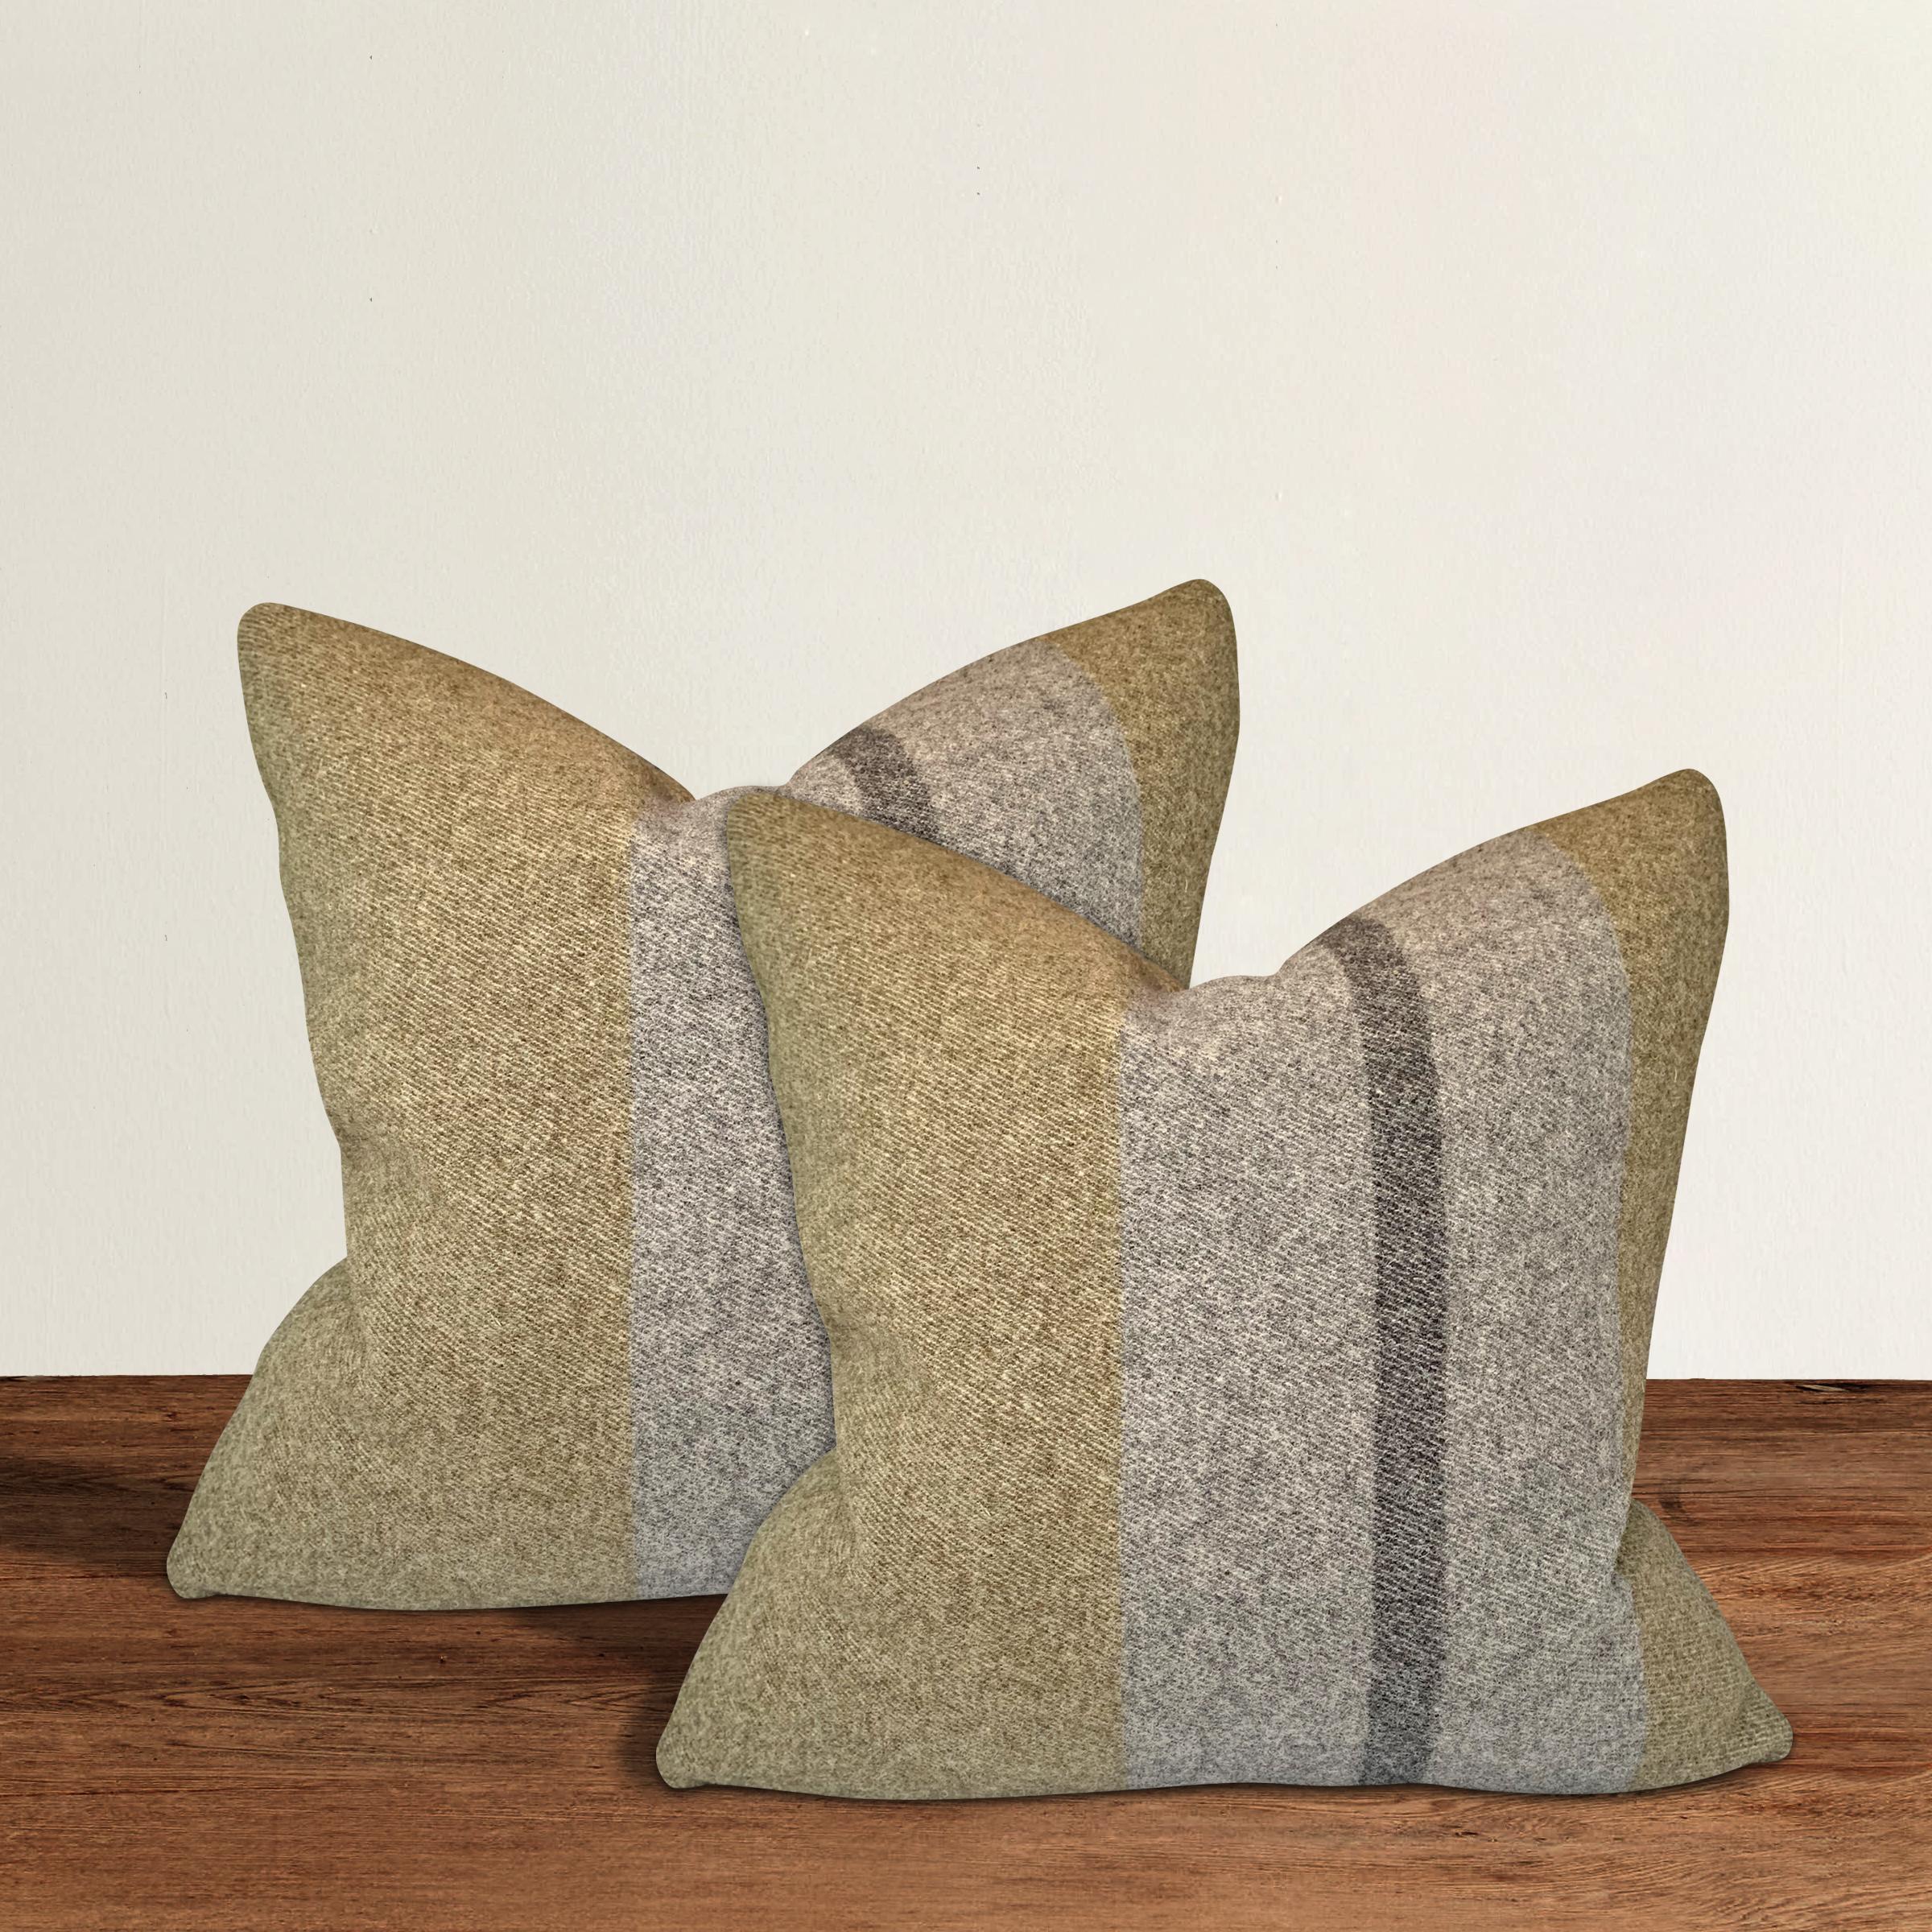 A wonderful pair of pillows with gray and black stripe against an army green ground, custom made from wool sourced from the Faribault Woolen Mills in Faribault, Minnesota. Faribault Woolen Mills was founded in 1865 along the Cannon River in